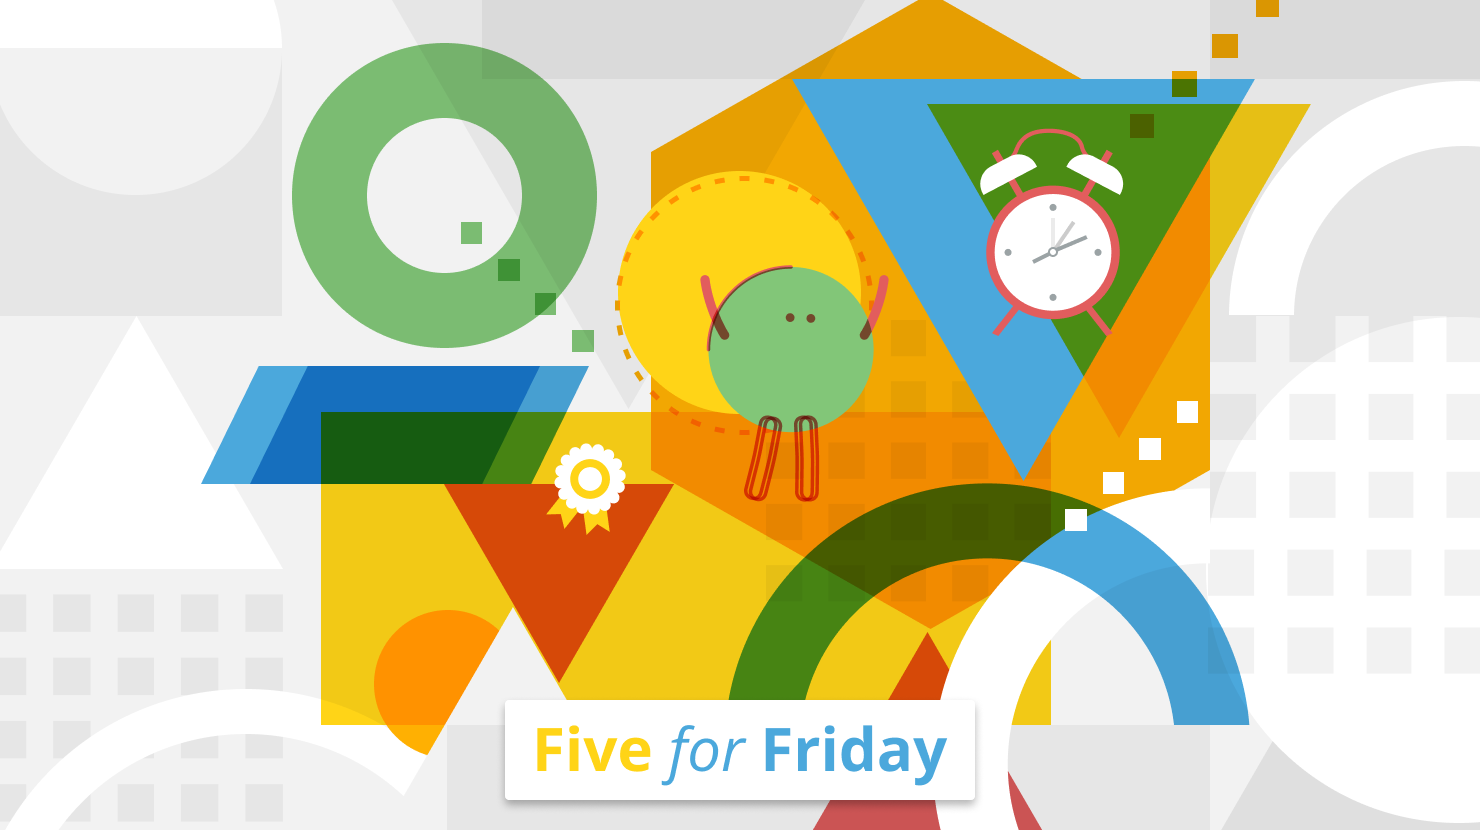 Five for Friday: Finding meaning in work